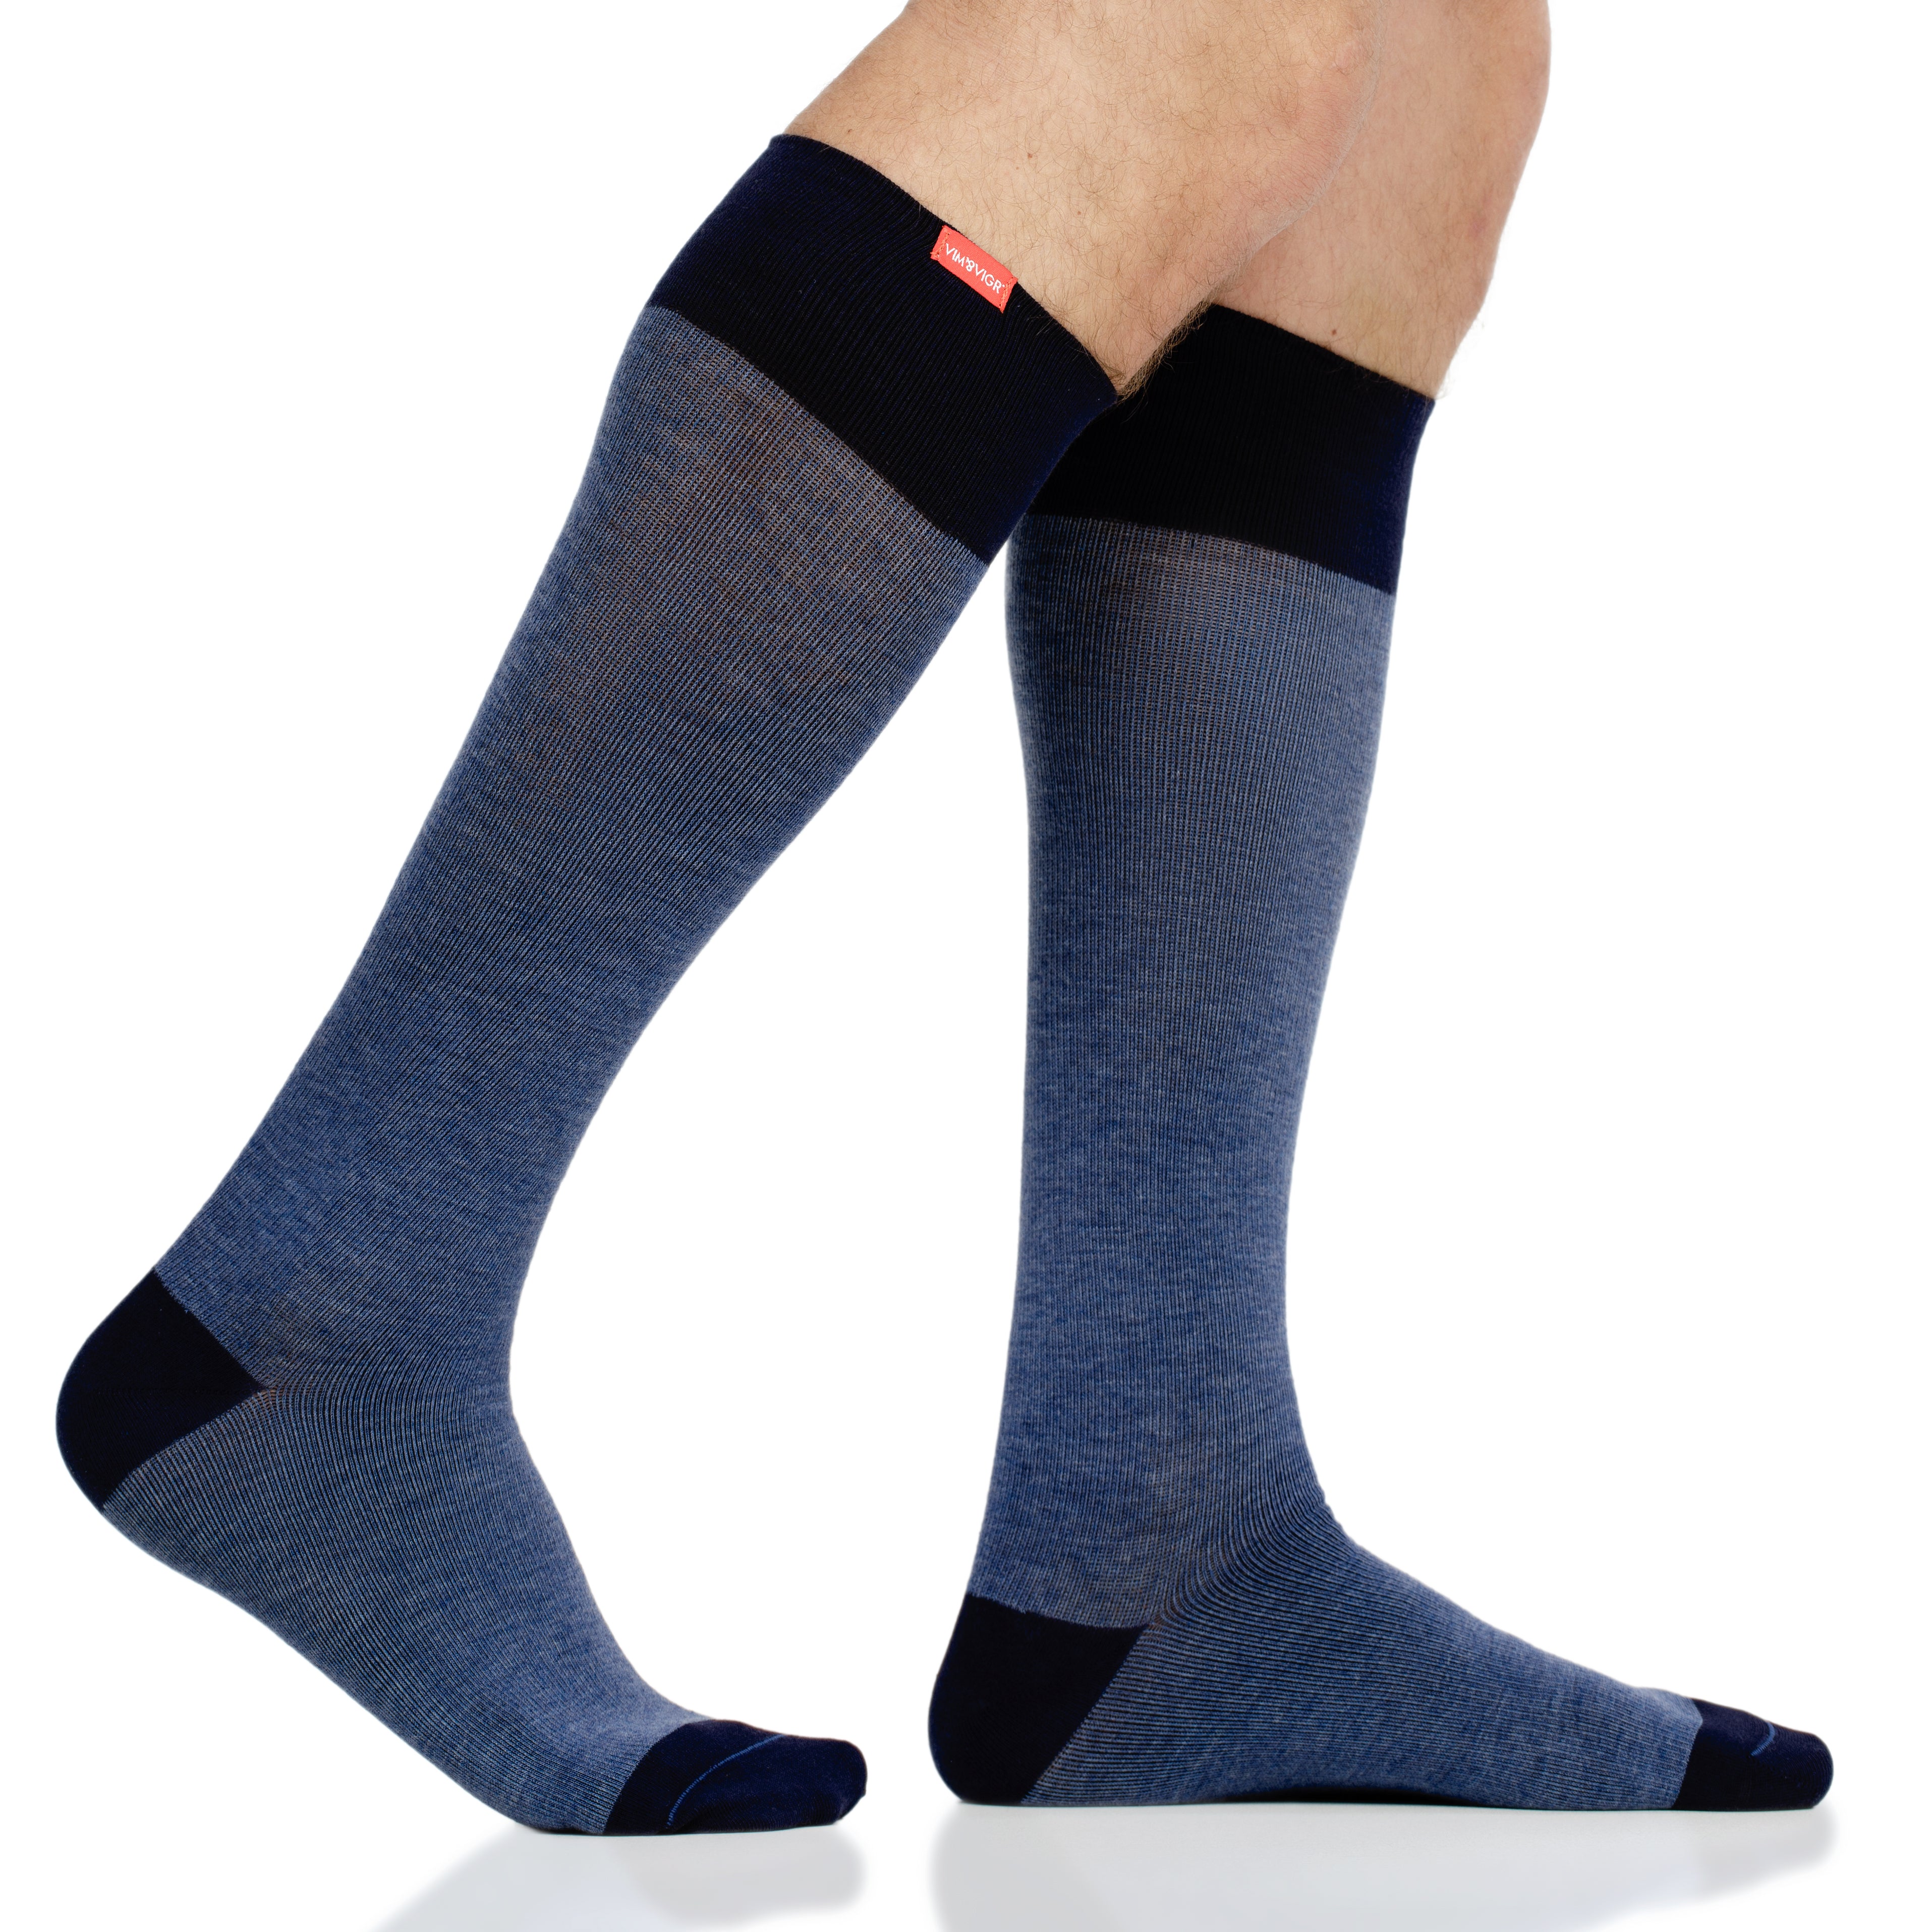 Heathered Collection: Navy (Cotton) compression socks